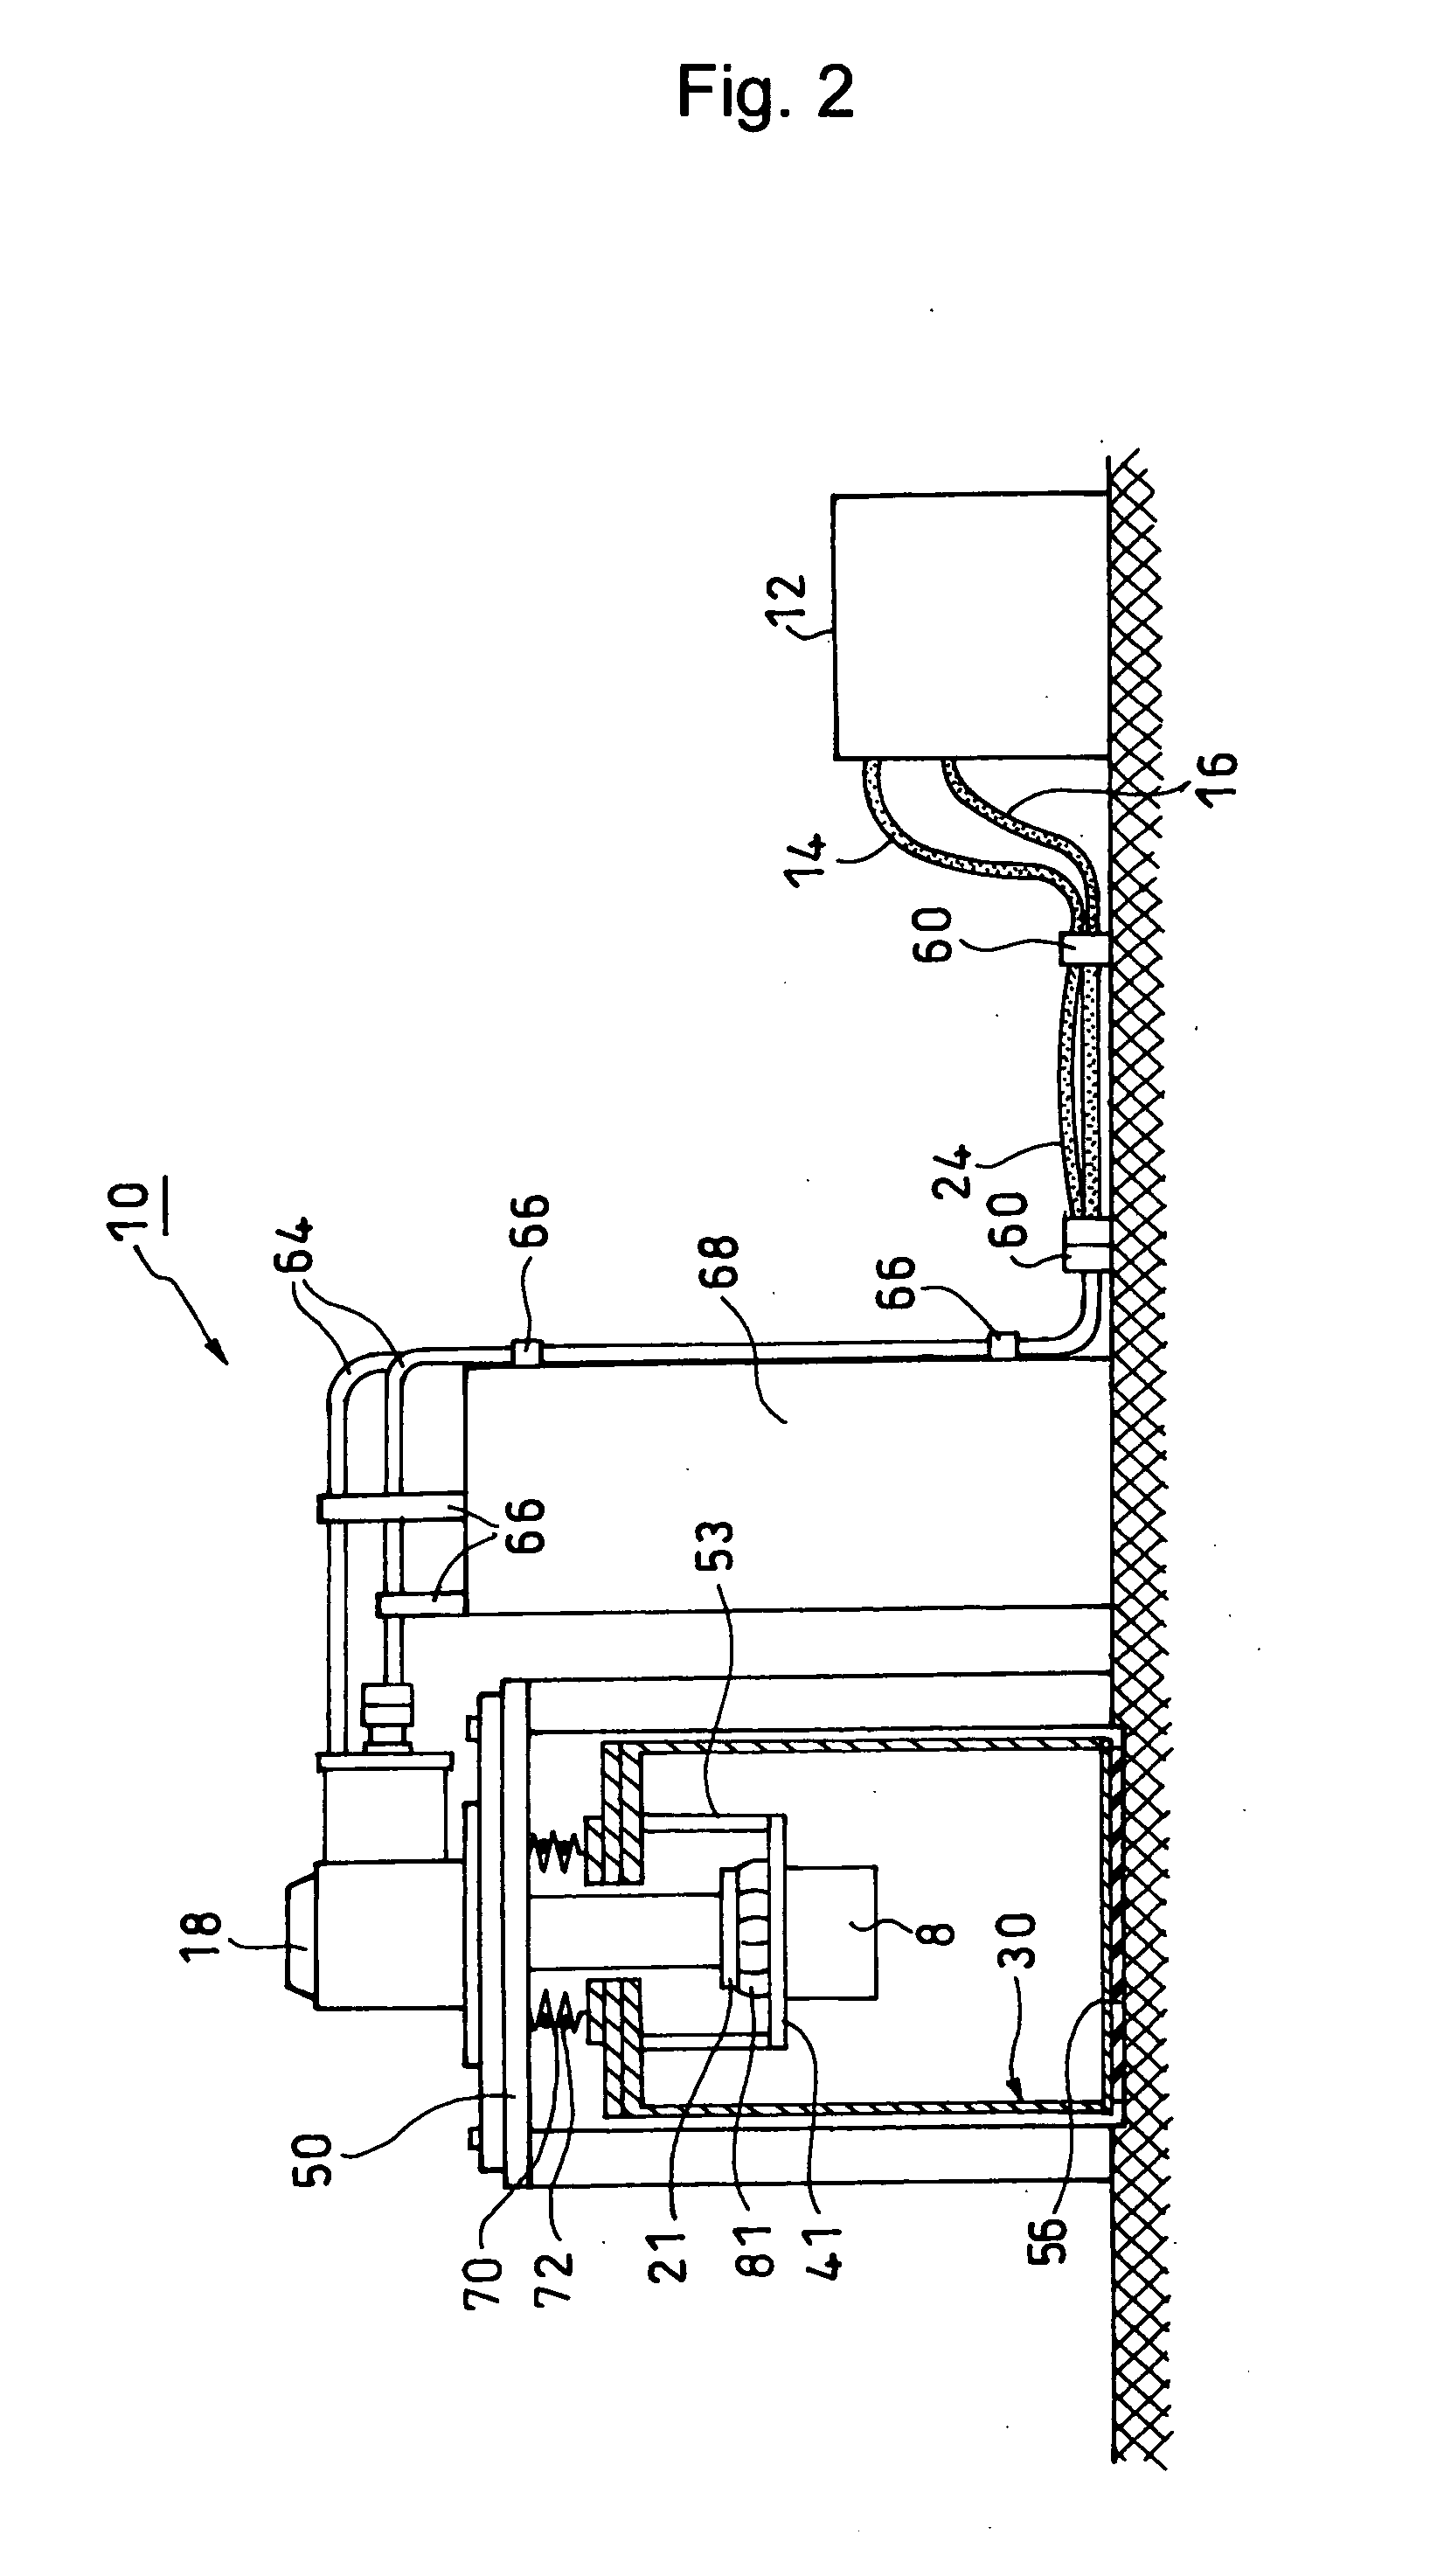 Cryogenic cooling apparatus